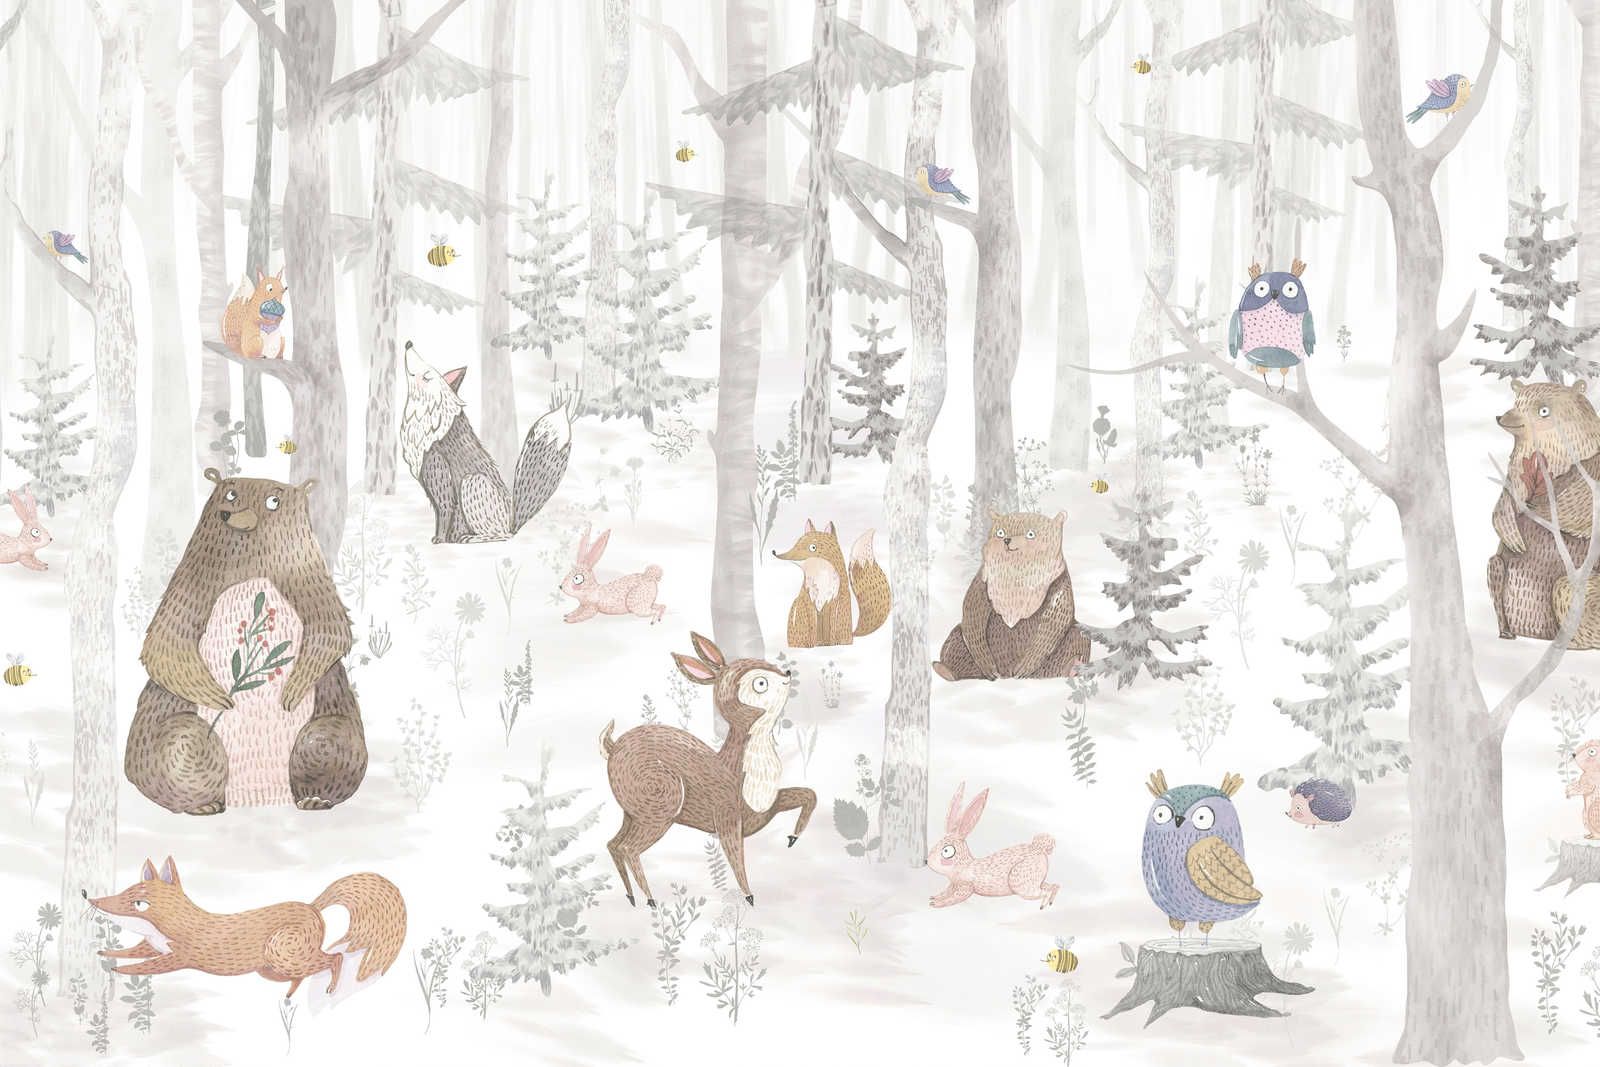             Canvas Enchanted Forest with Animals - 120 cm x 80 cm
        